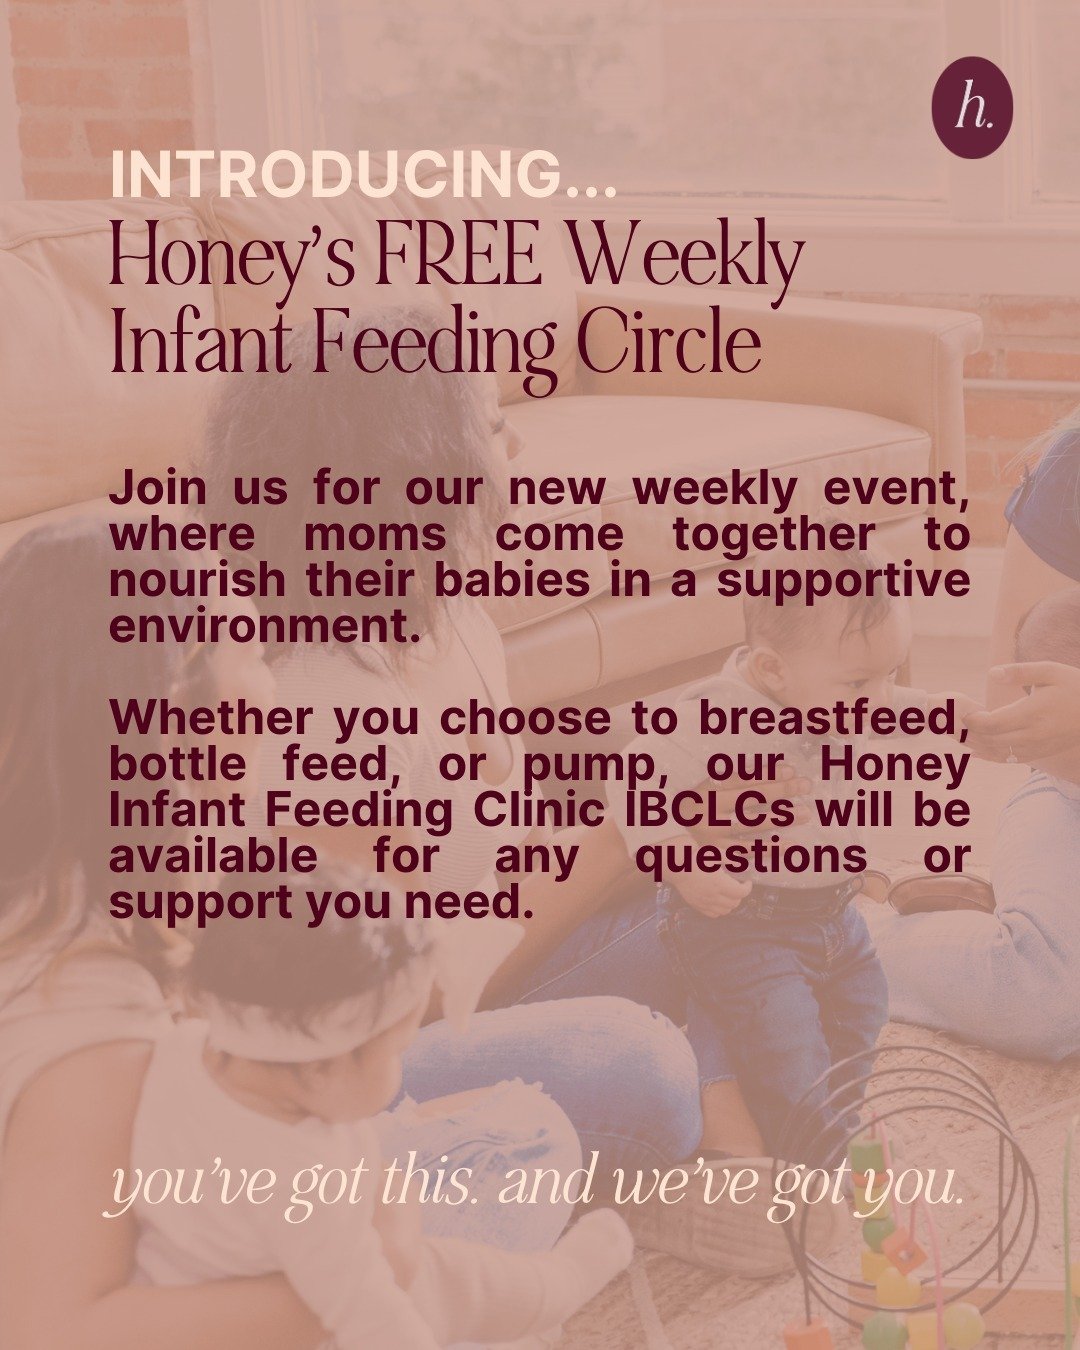 📣NEW AT HONEY📣⁠
⁠
Every Wednesday at 1pm, join us at Honey for a FREE Infant Feeding Circle.⁠
⁠
Connect with other feeding mamas, as well as our expert Honey IBCLCs.⁠
⁠
Registration requested - visit our website to sign up.⁠
⁠
⁠
⁠
⁠
⁠
⁠
⁠
⁠
⁠
⁠
#la